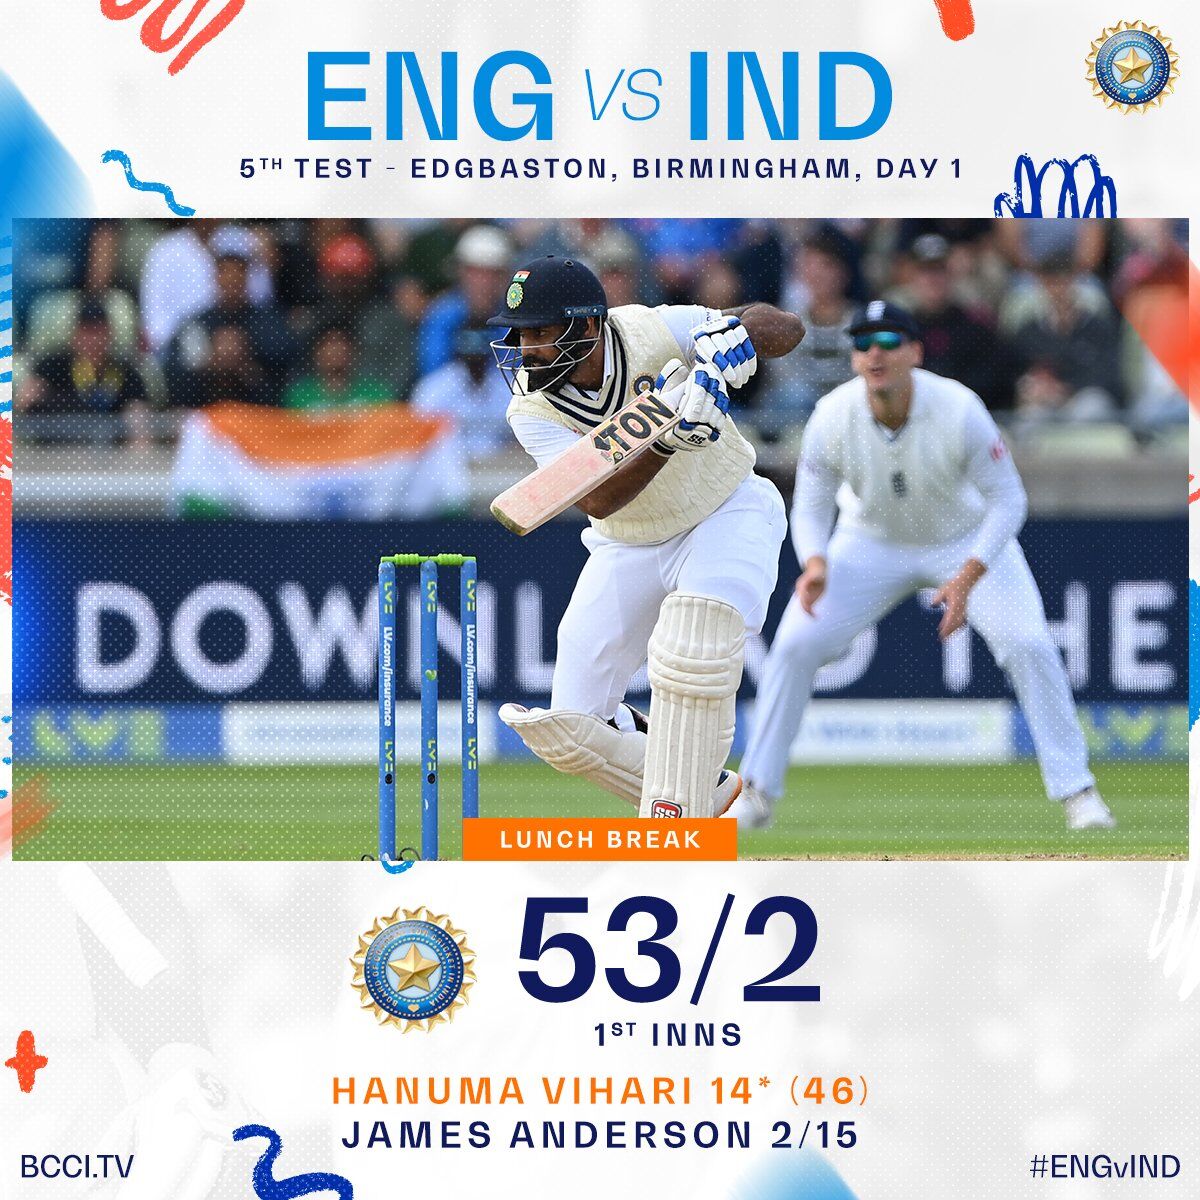 Ind-Eng Test series: India 53/2 before lunch in the 5th match